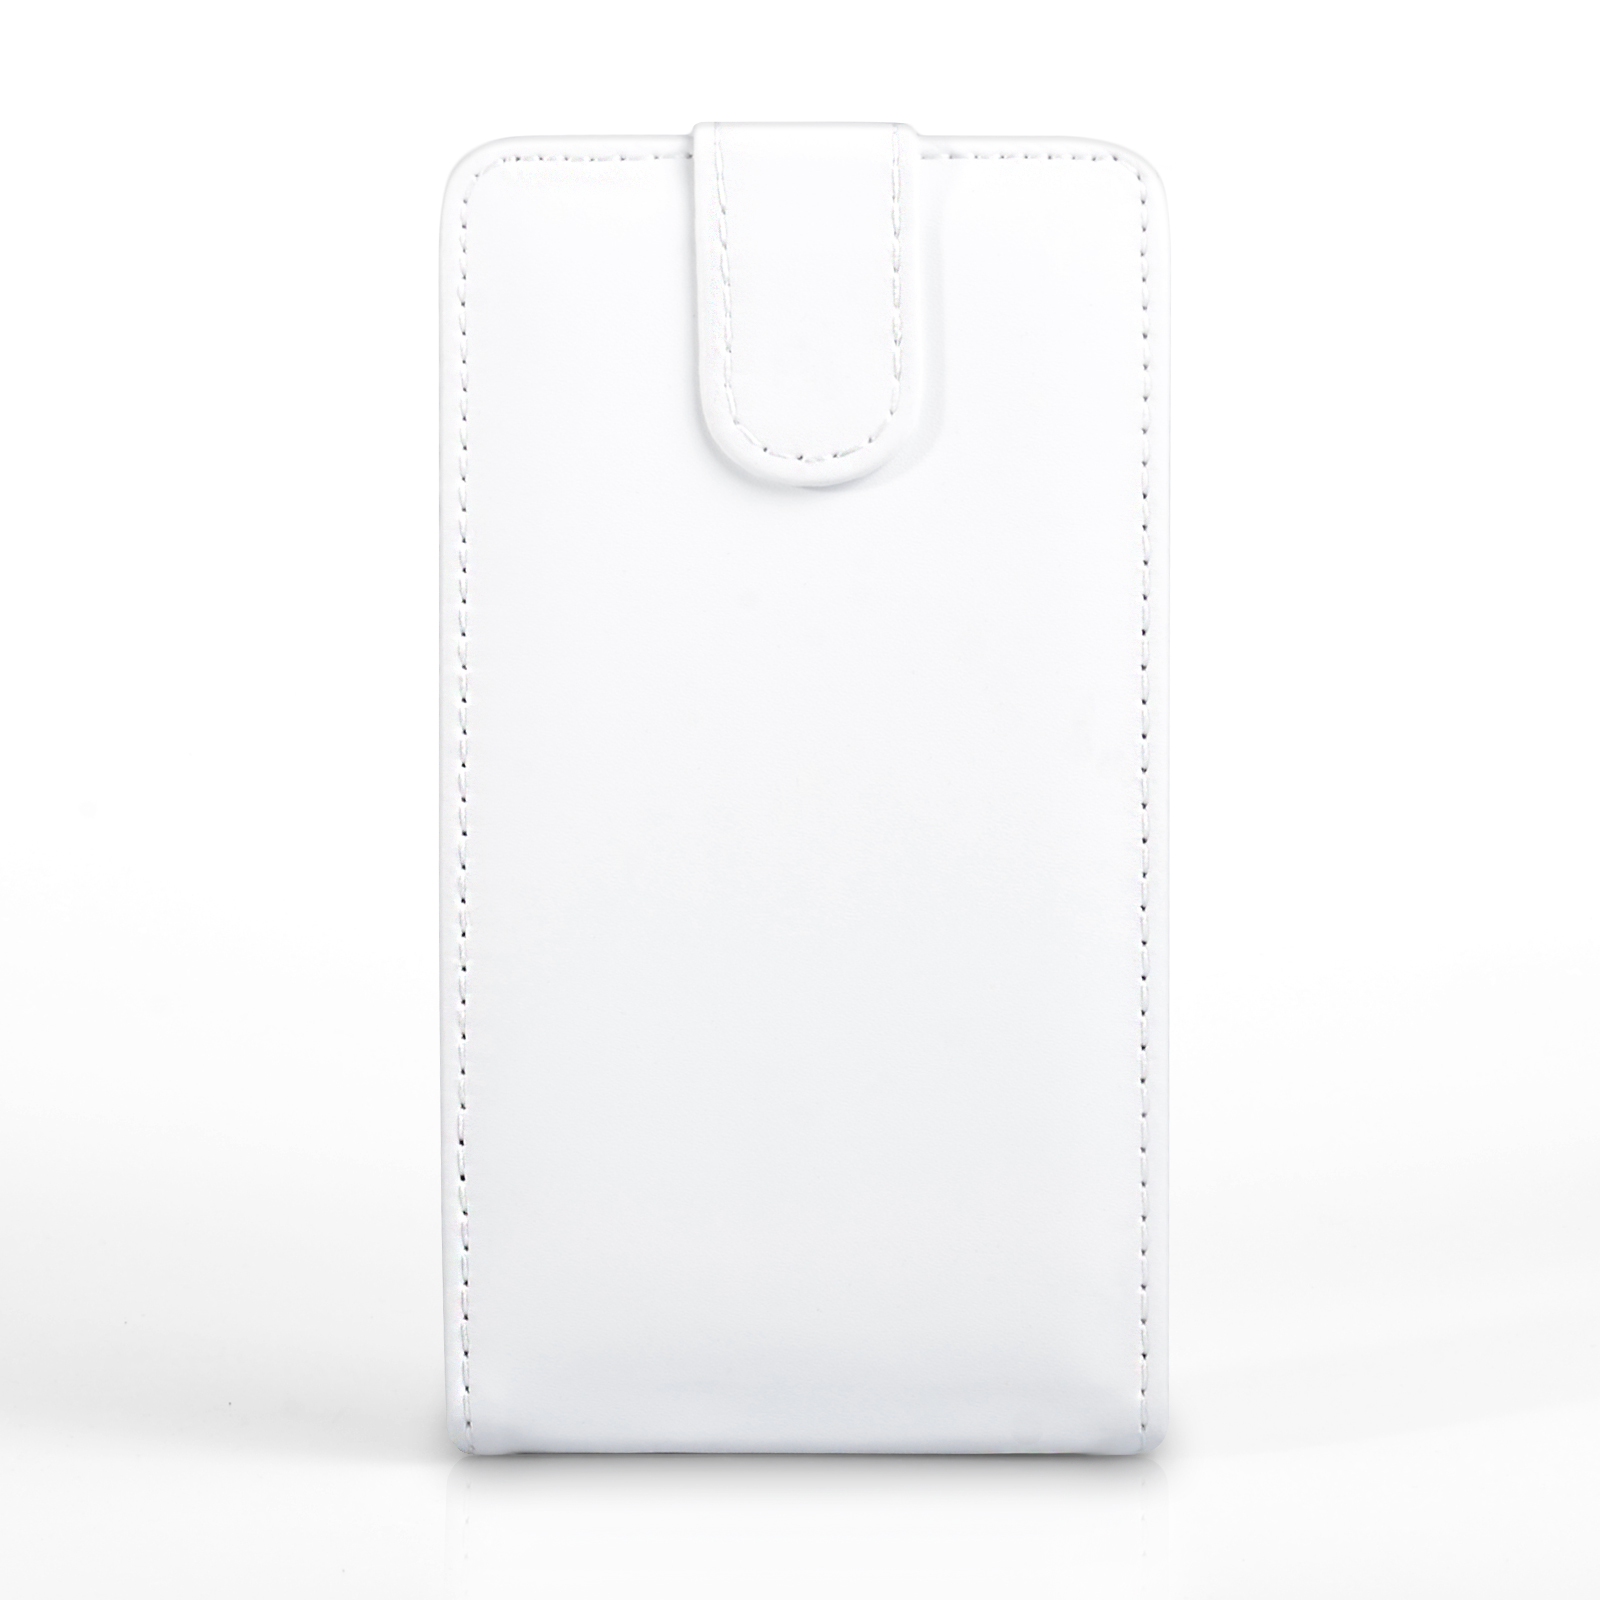 YouSave Samsung Galaxy Note 3 Neo Leather-Effect Flip Case - White